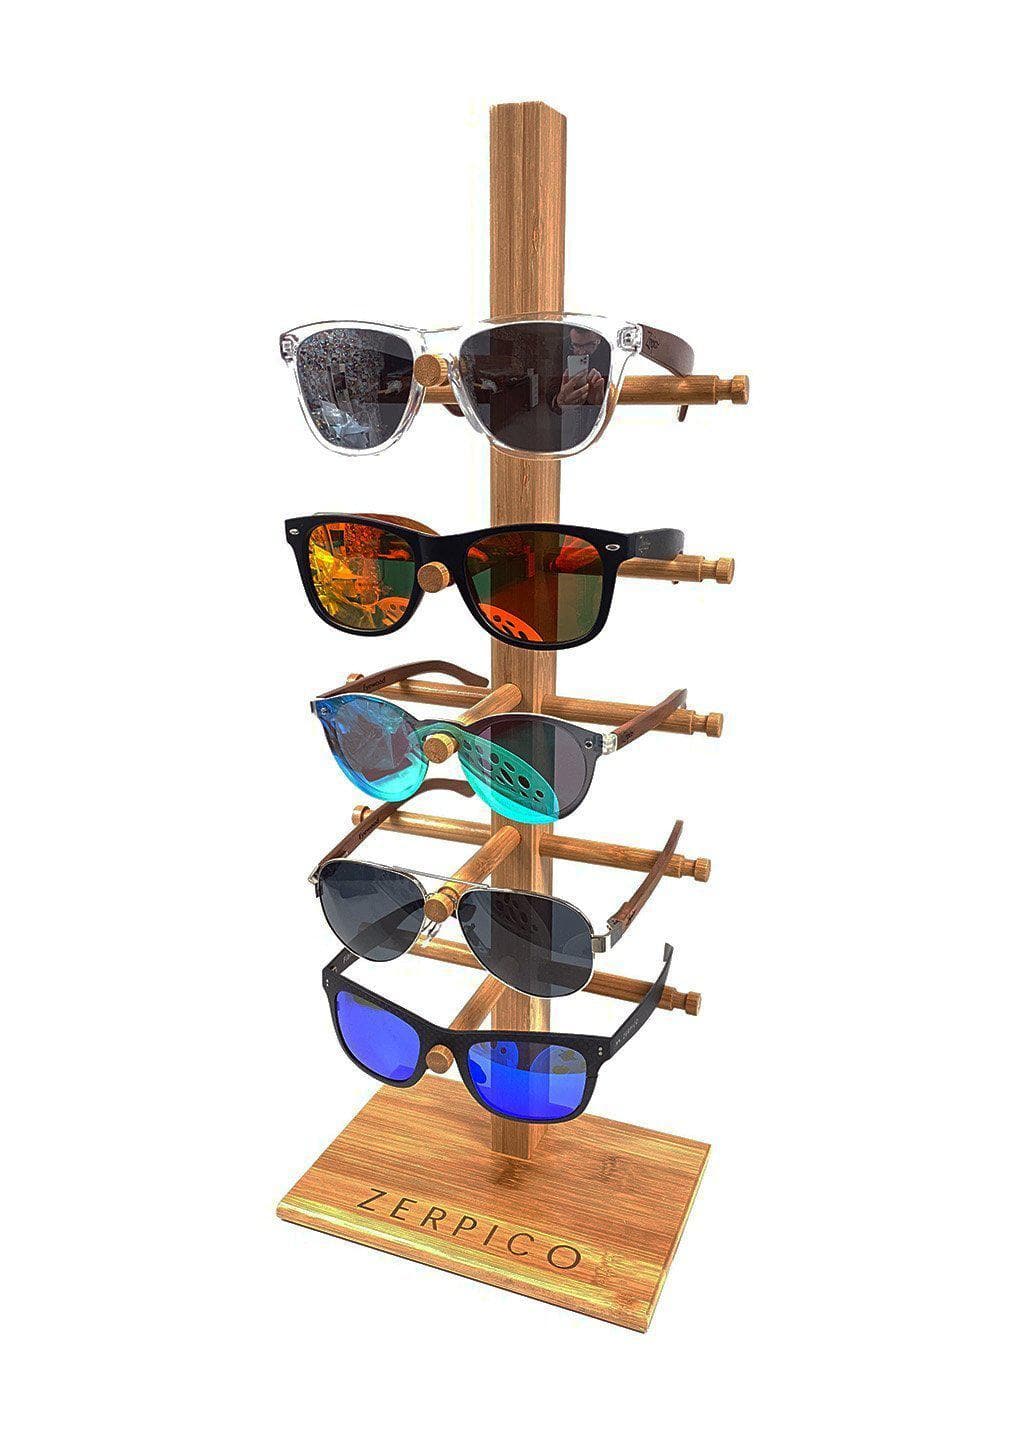 Smaller version of our wooden sunglasses stand. This with sunglasses on it.